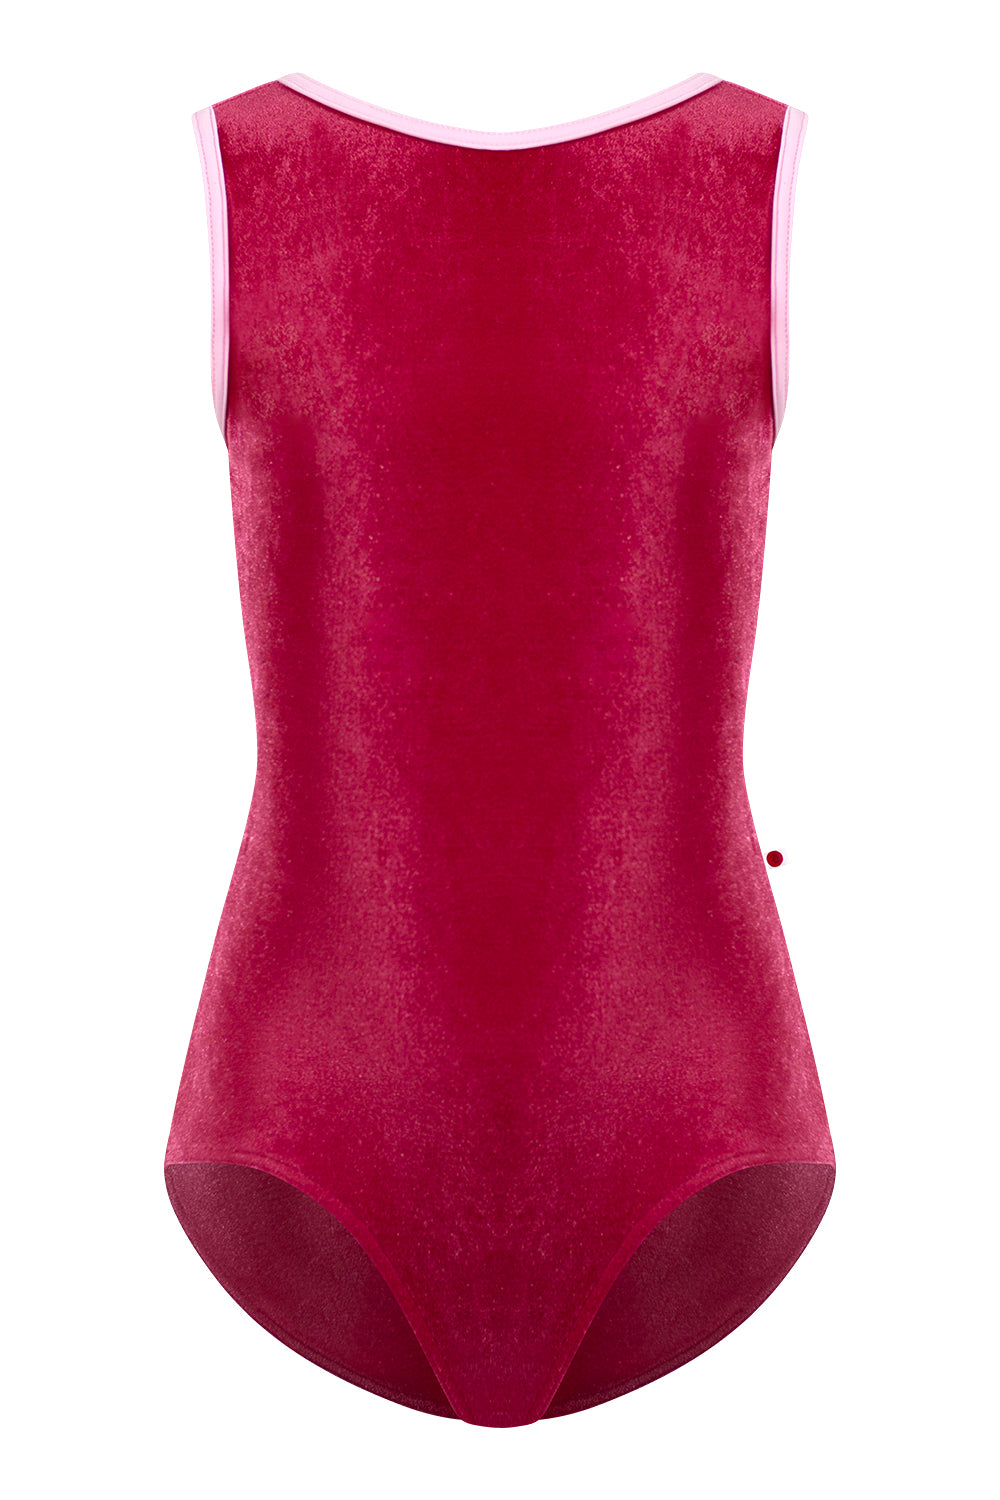 Kids Sofiane leotard in V-Peony body color with T-Rose trim color